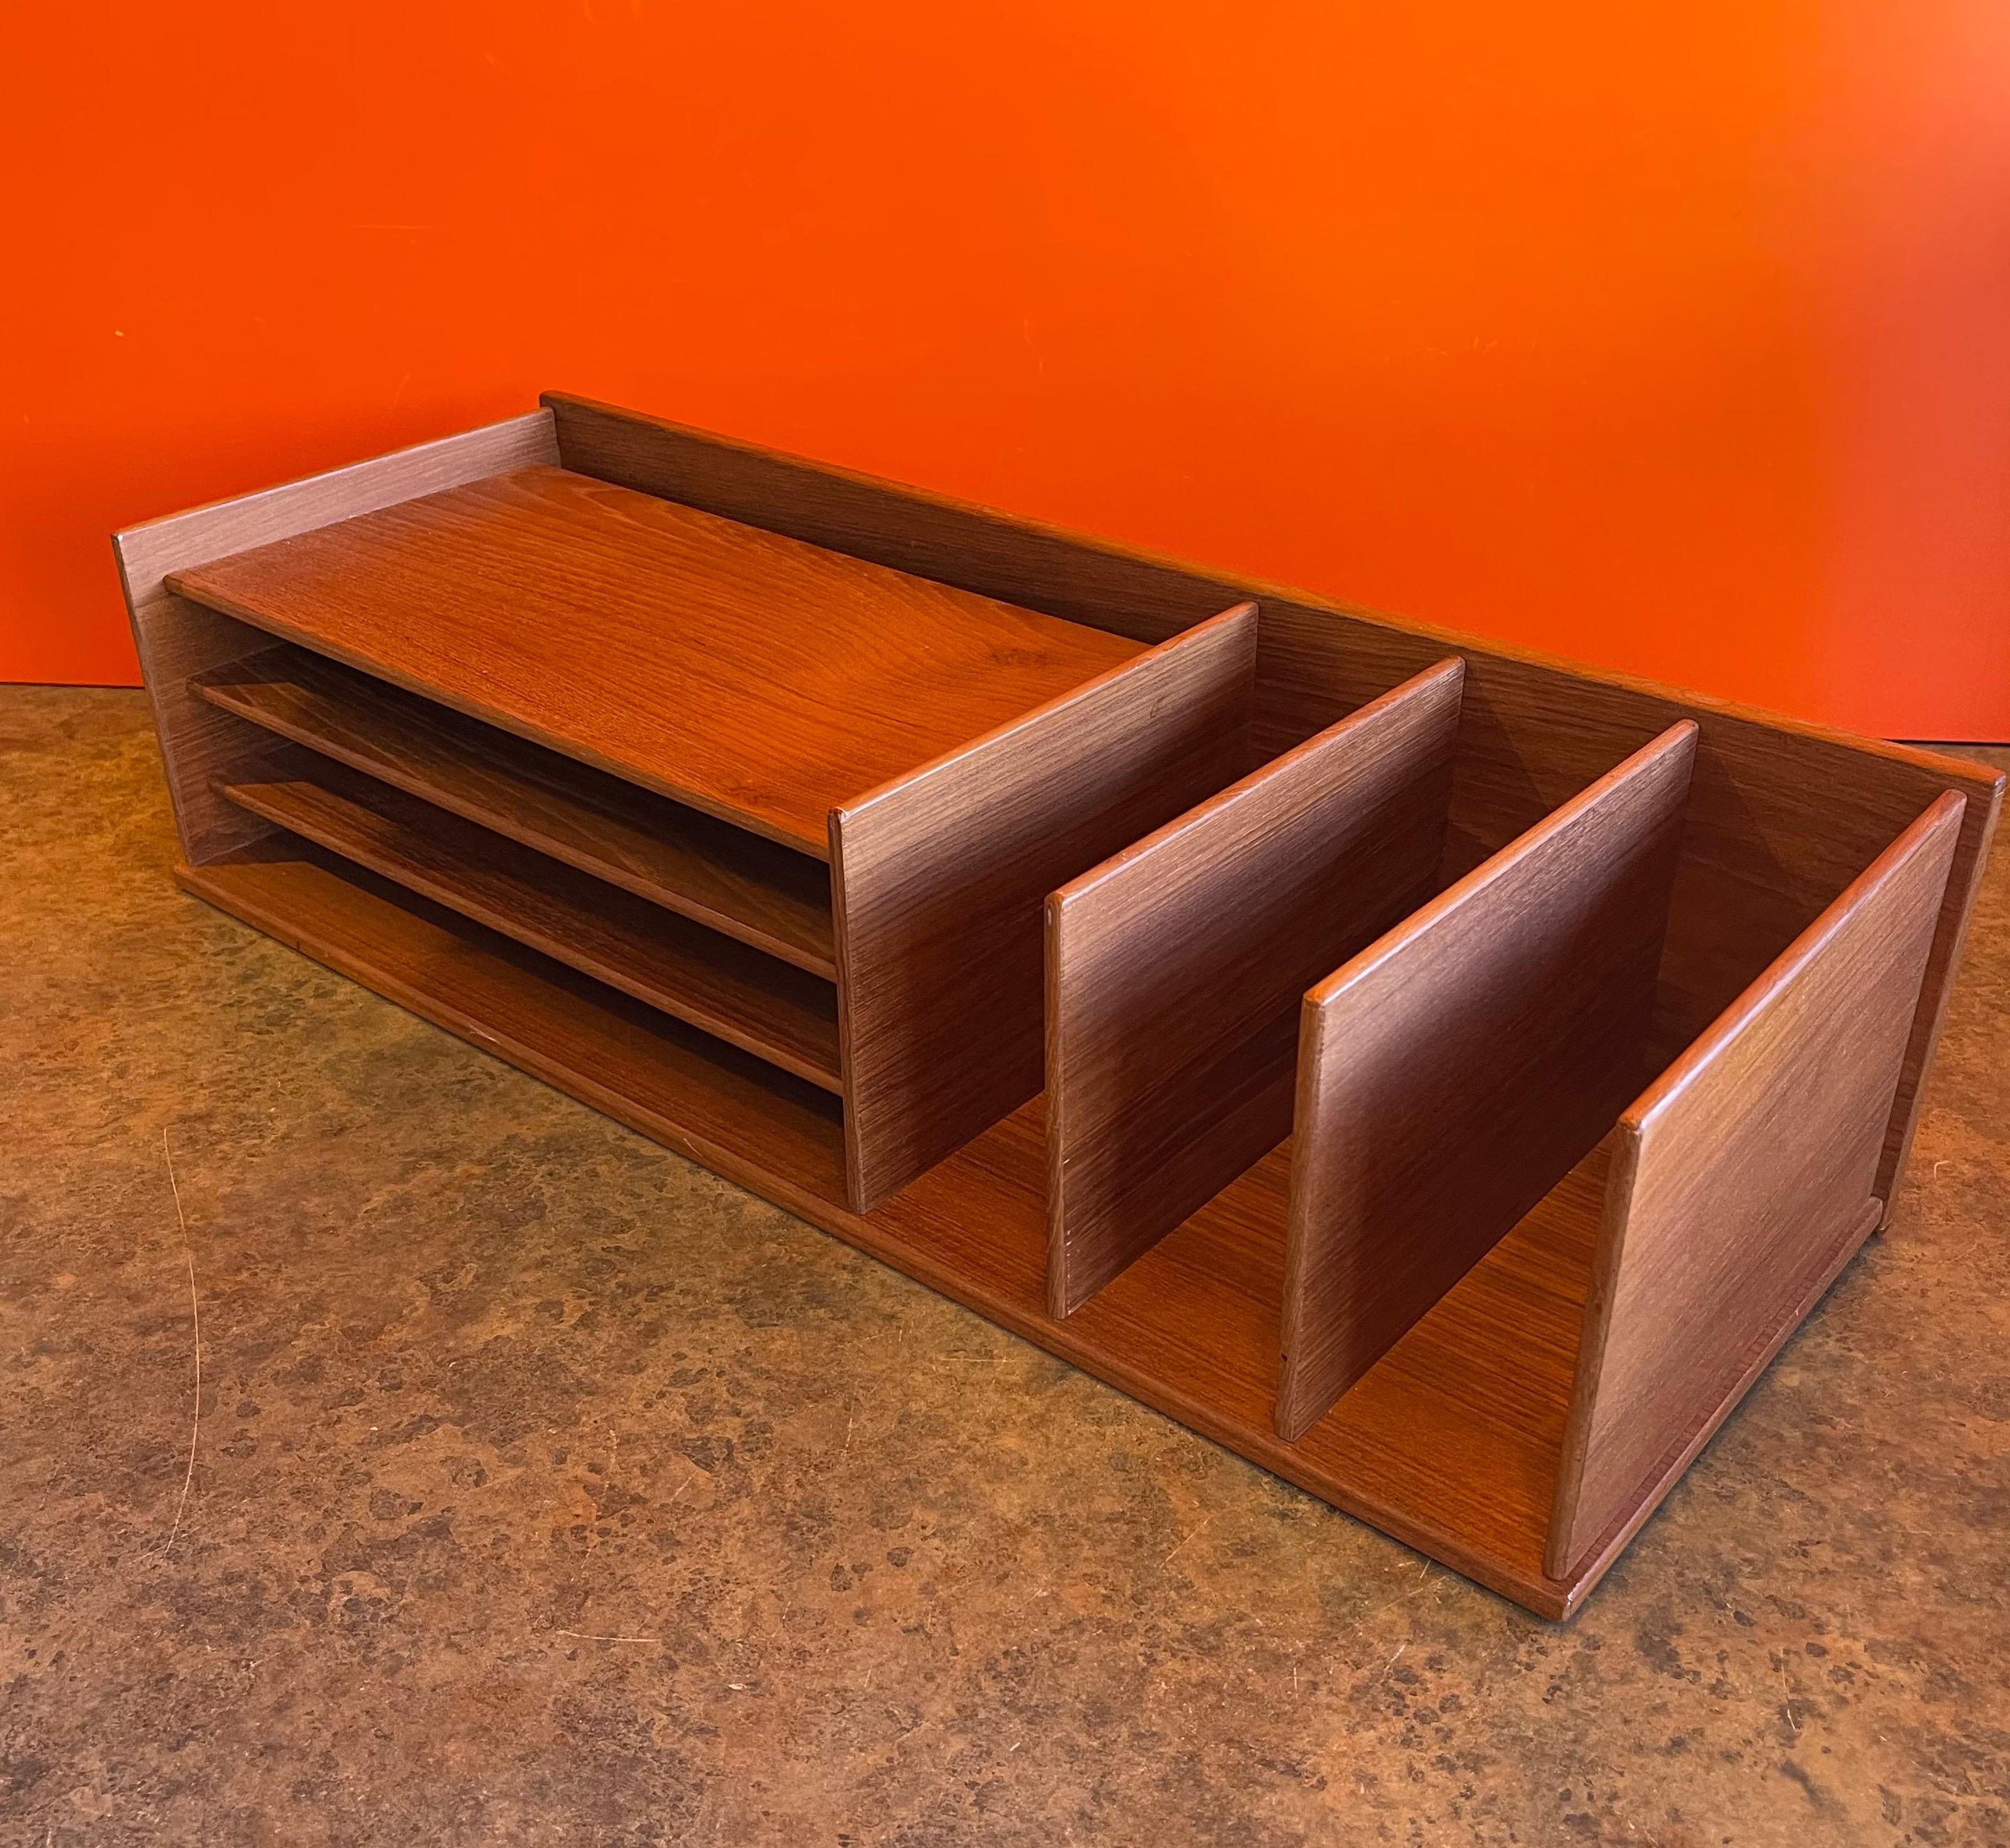 Very functional Danish modern teak desk organizer or letter tray by Georg Petersens Møbelfabrik, circa 1970s. The piece is in excellent condition and measures 23.5